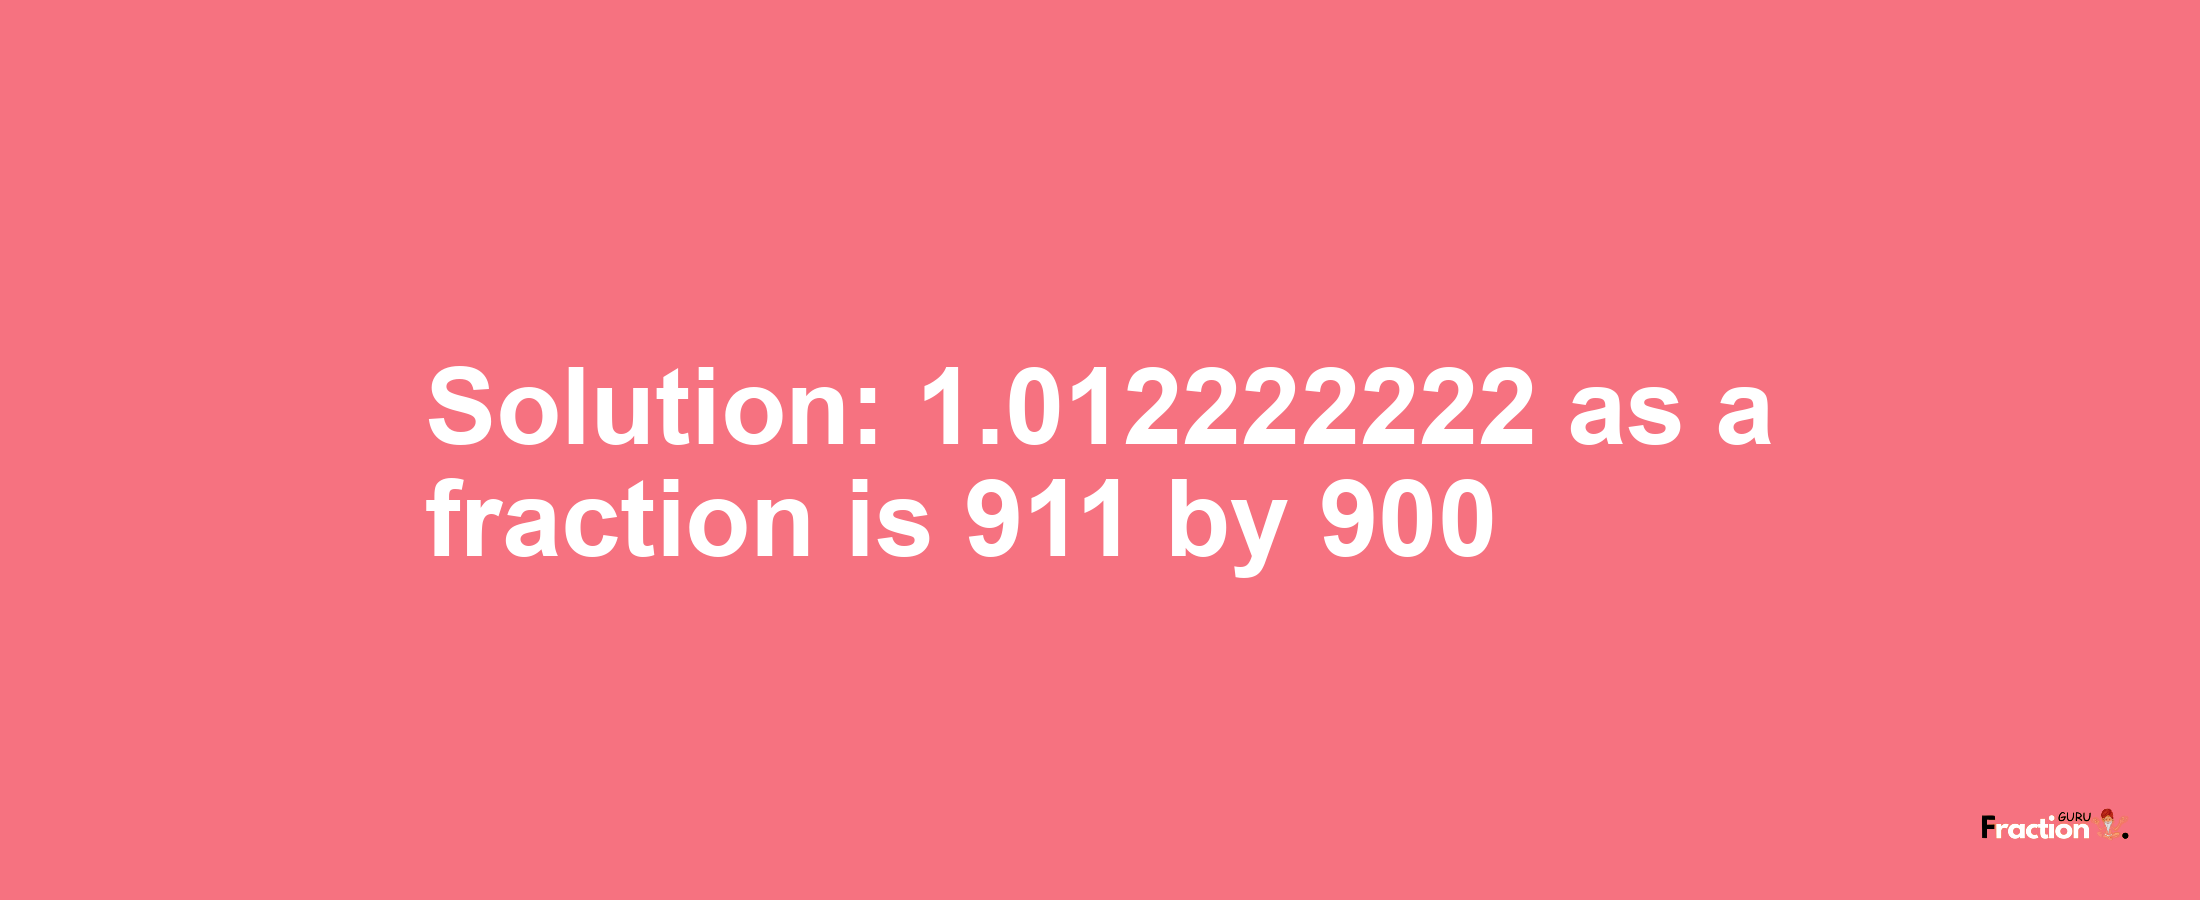 Solution:1.012222222 as a fraction is 911/900